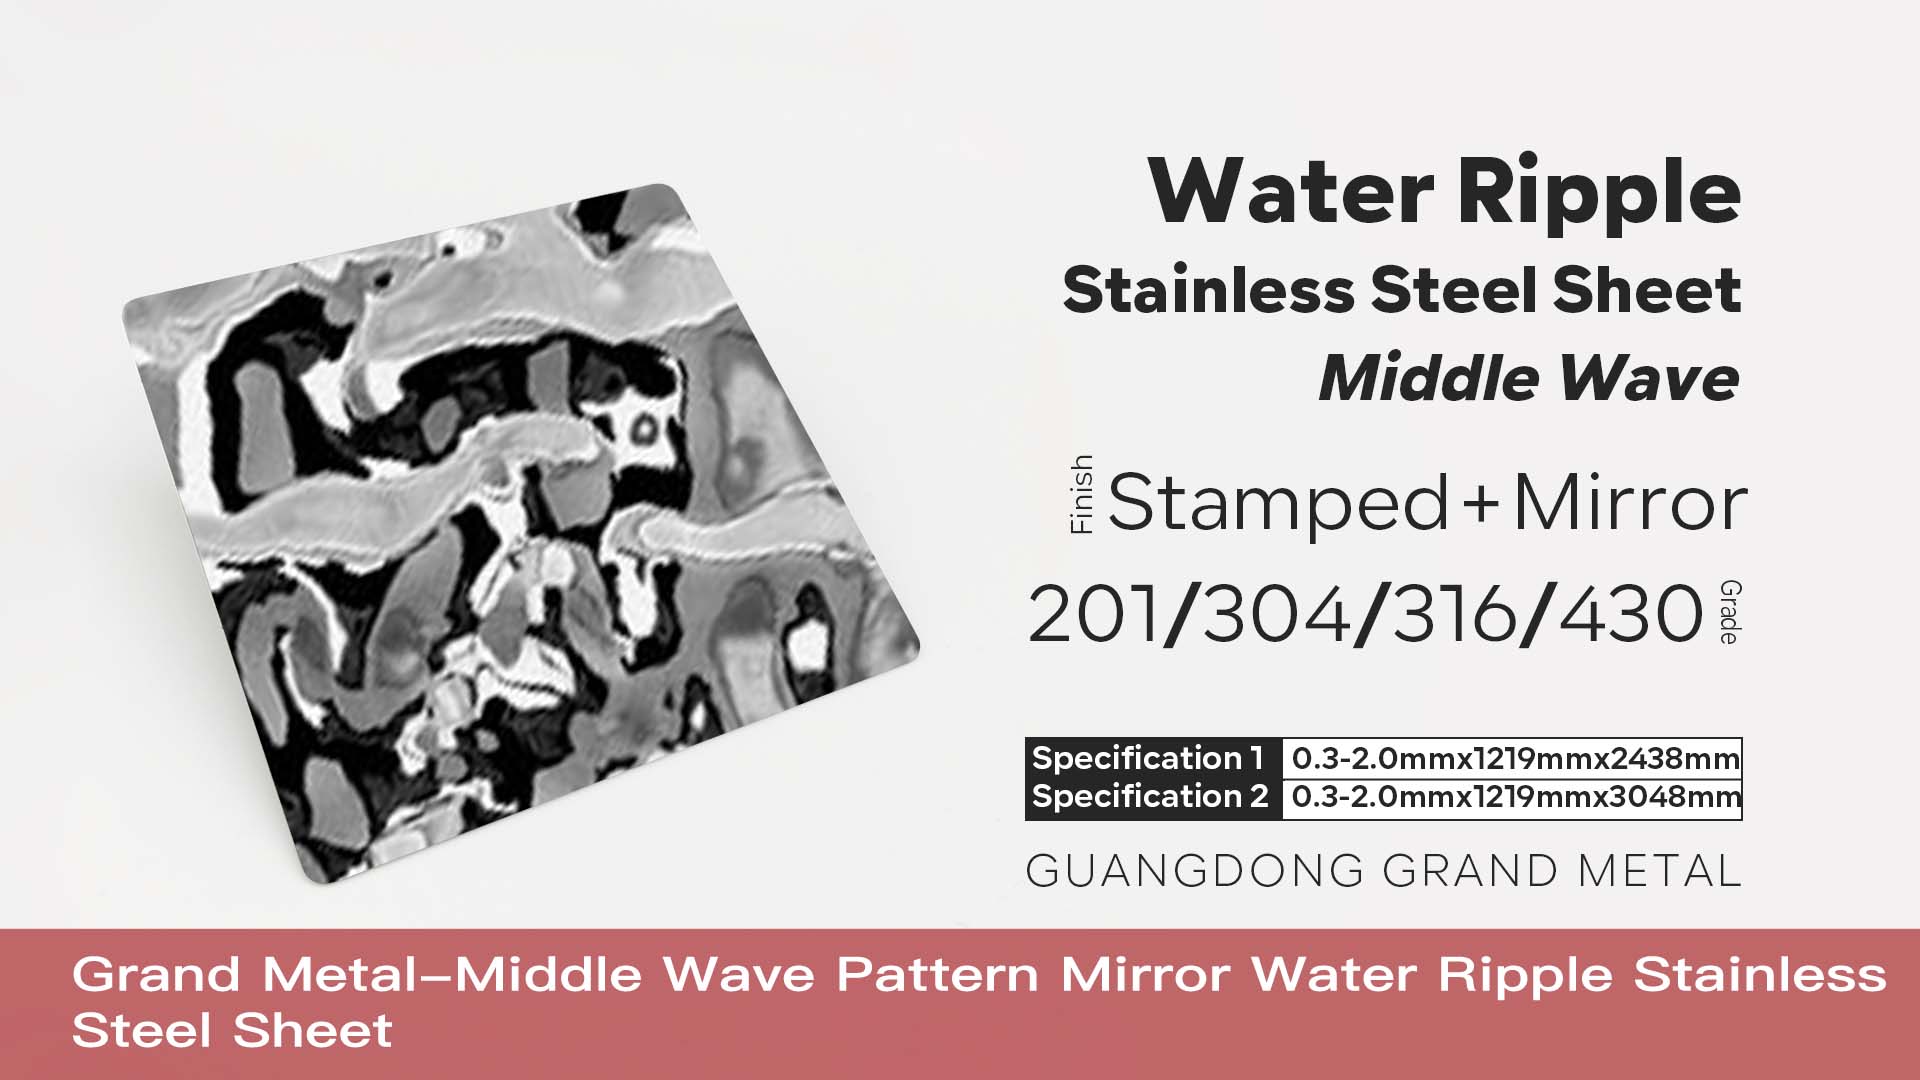 Middle Wave Pattern Mirror Water Ripple Stainless Steel Sheet